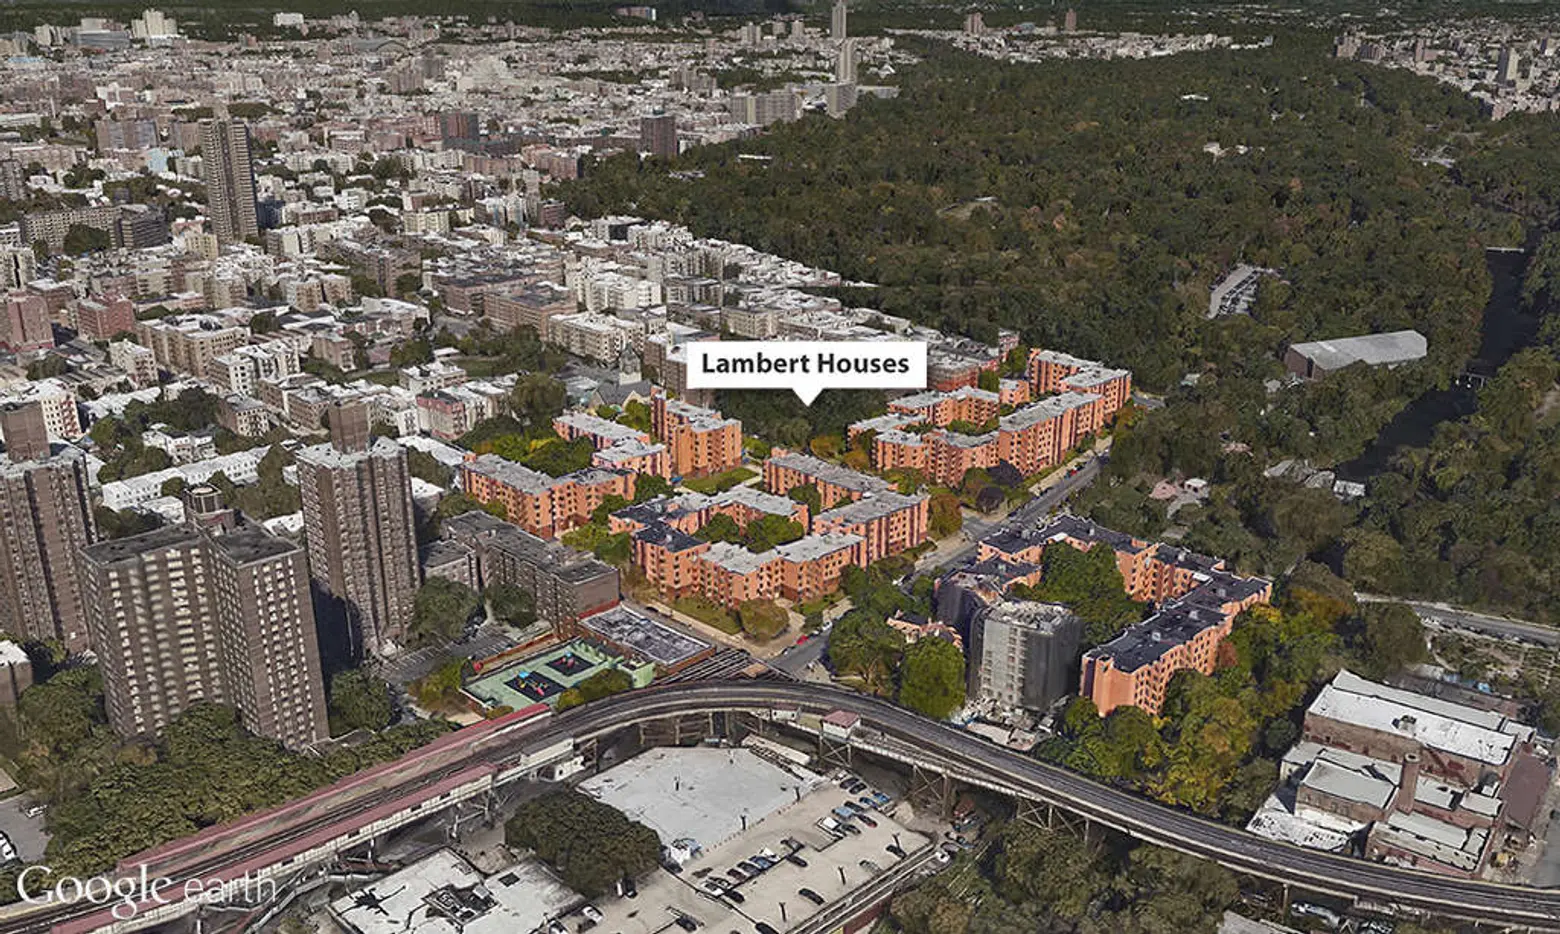 $600M overhaul at the Lambert Houses underway to bring 1,665 affordable housing units to the Bronx